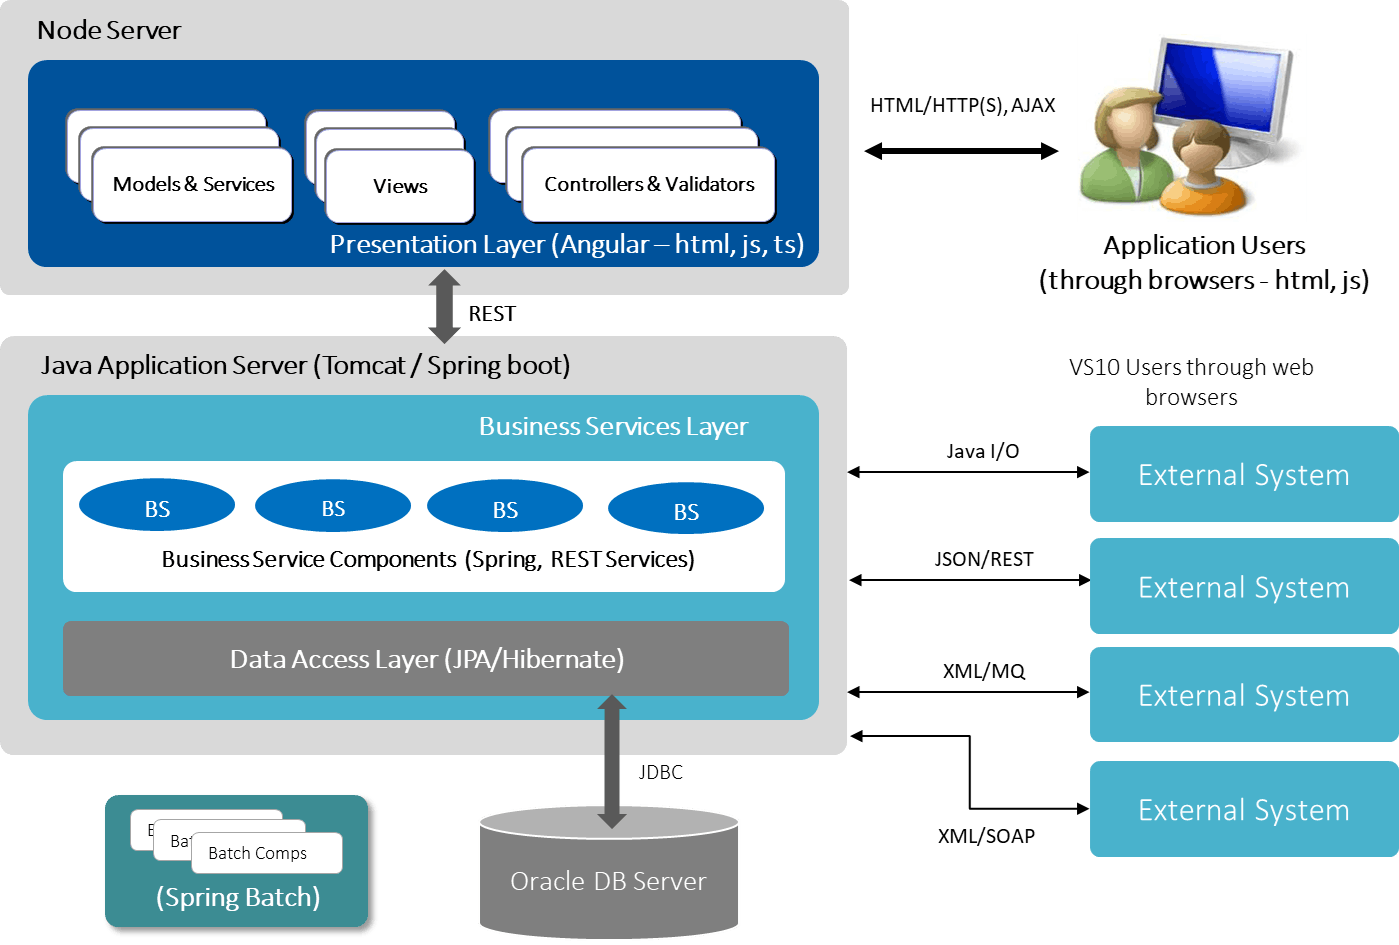 Technical architecture of the application in a modernized state